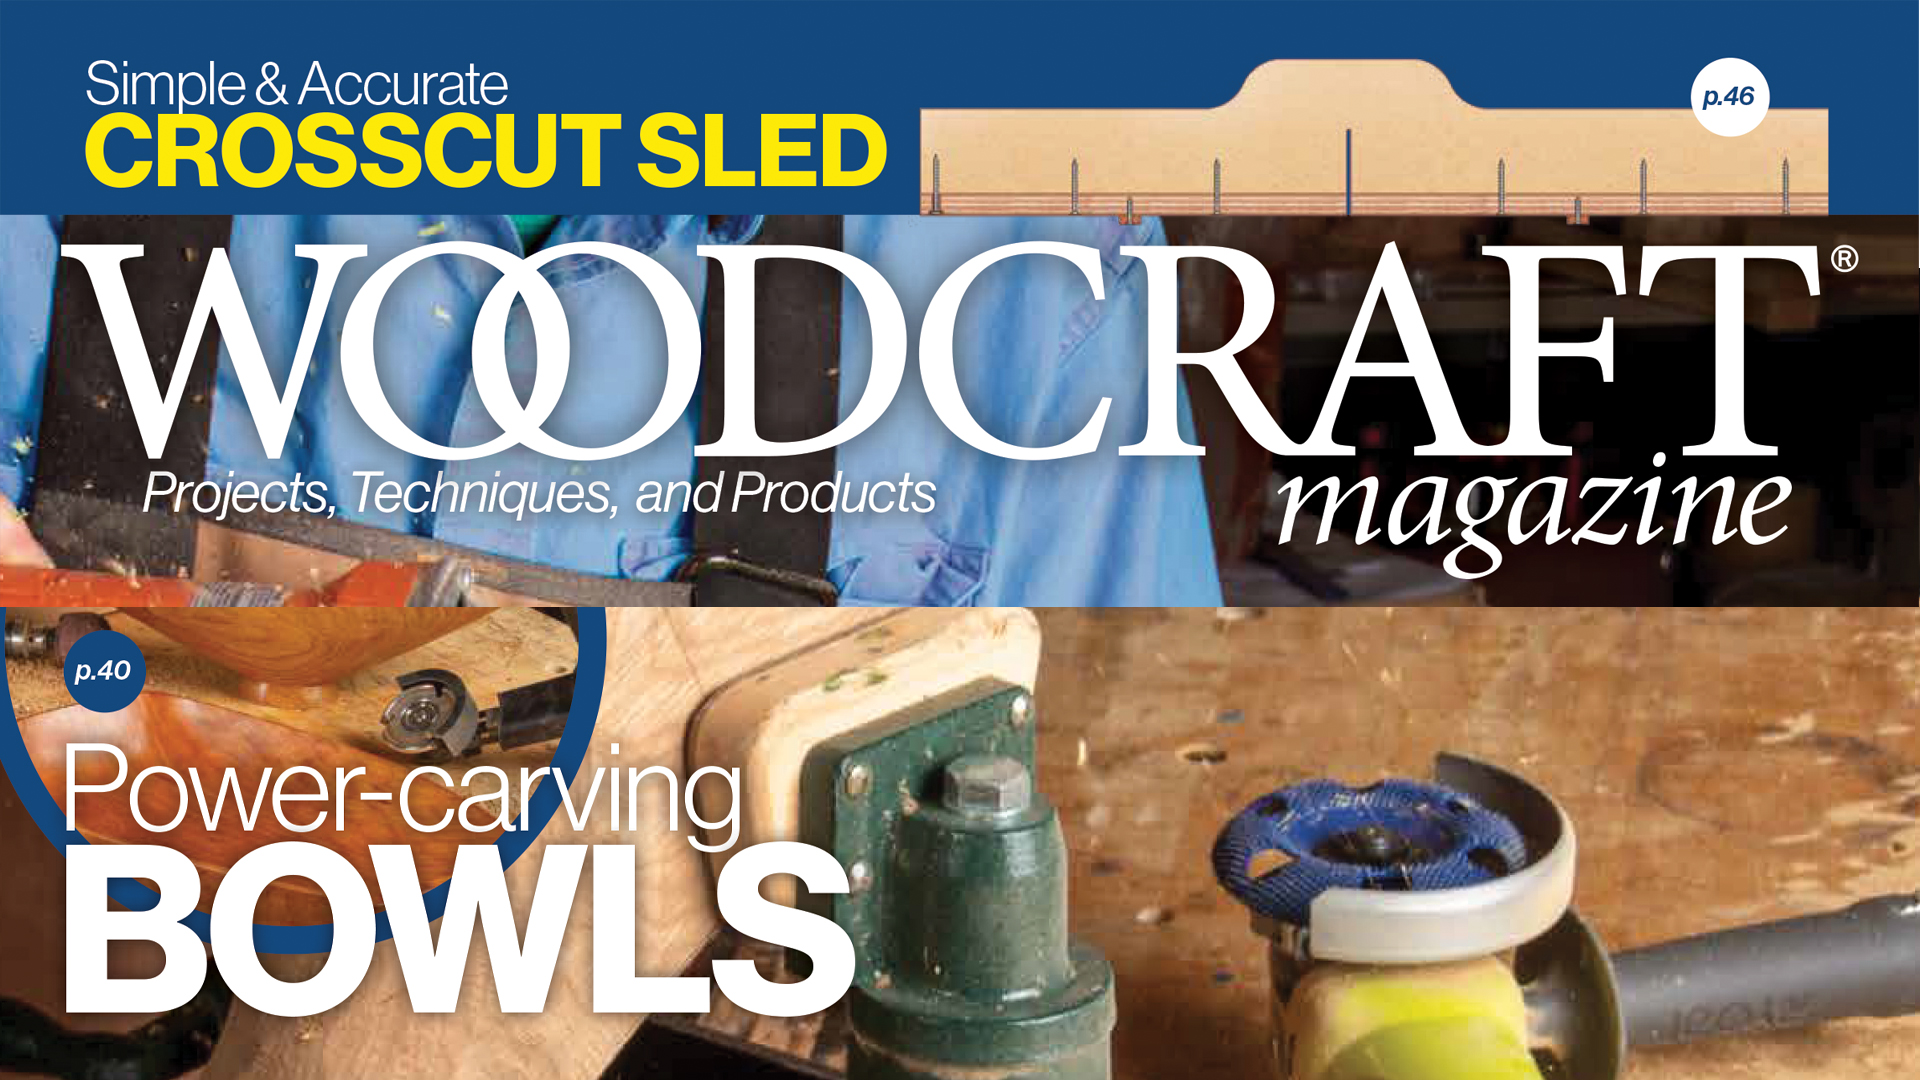 Power Carving Bowls: Tools and Techniques for Sculpting with KAT & Manpa featured in Woodcraft Magazine